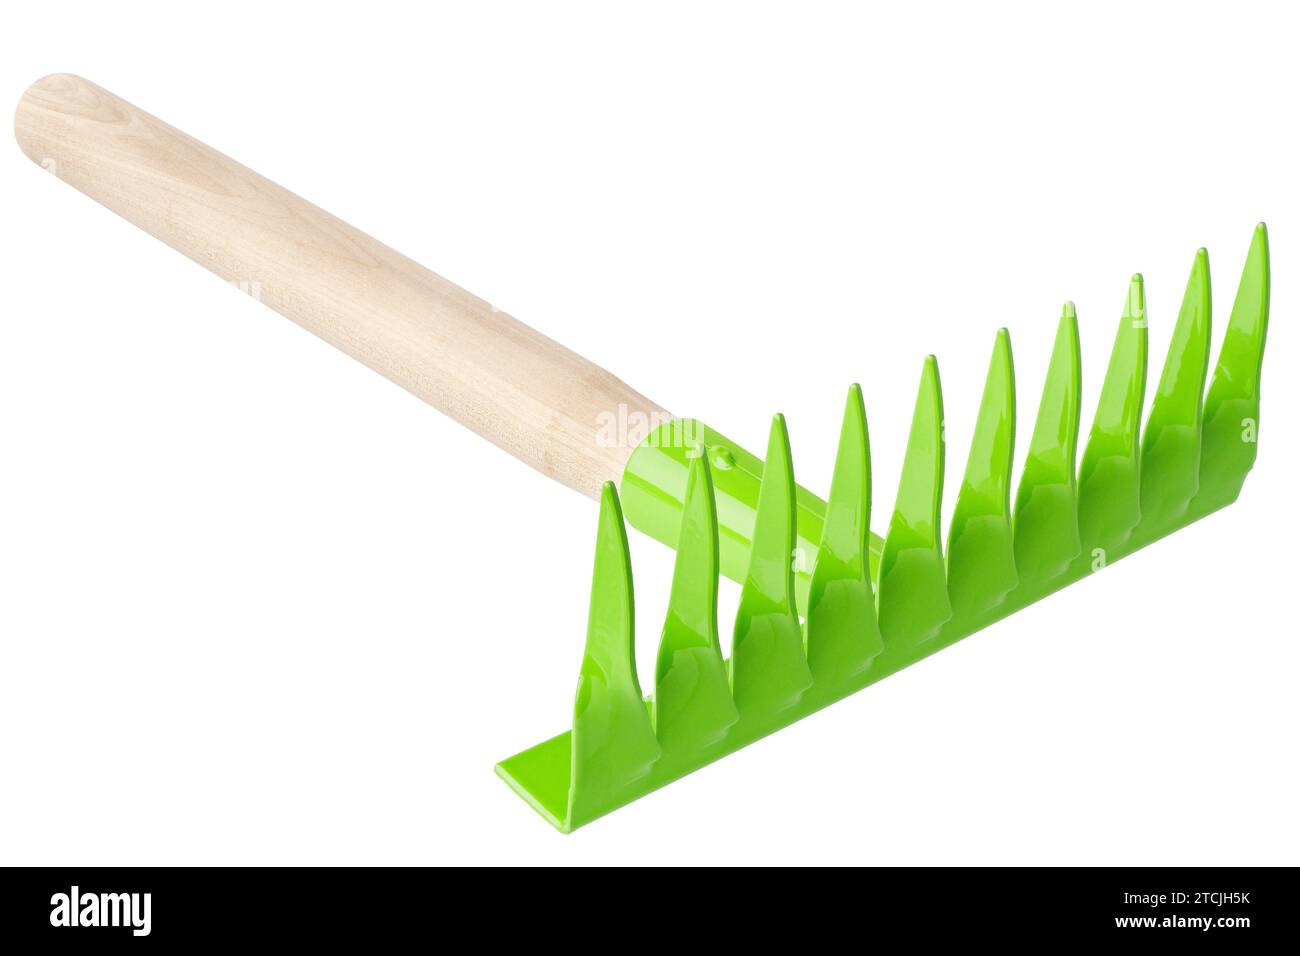 Green metal rake with wooden handle, garden tool, isolated on white background Stock Photo